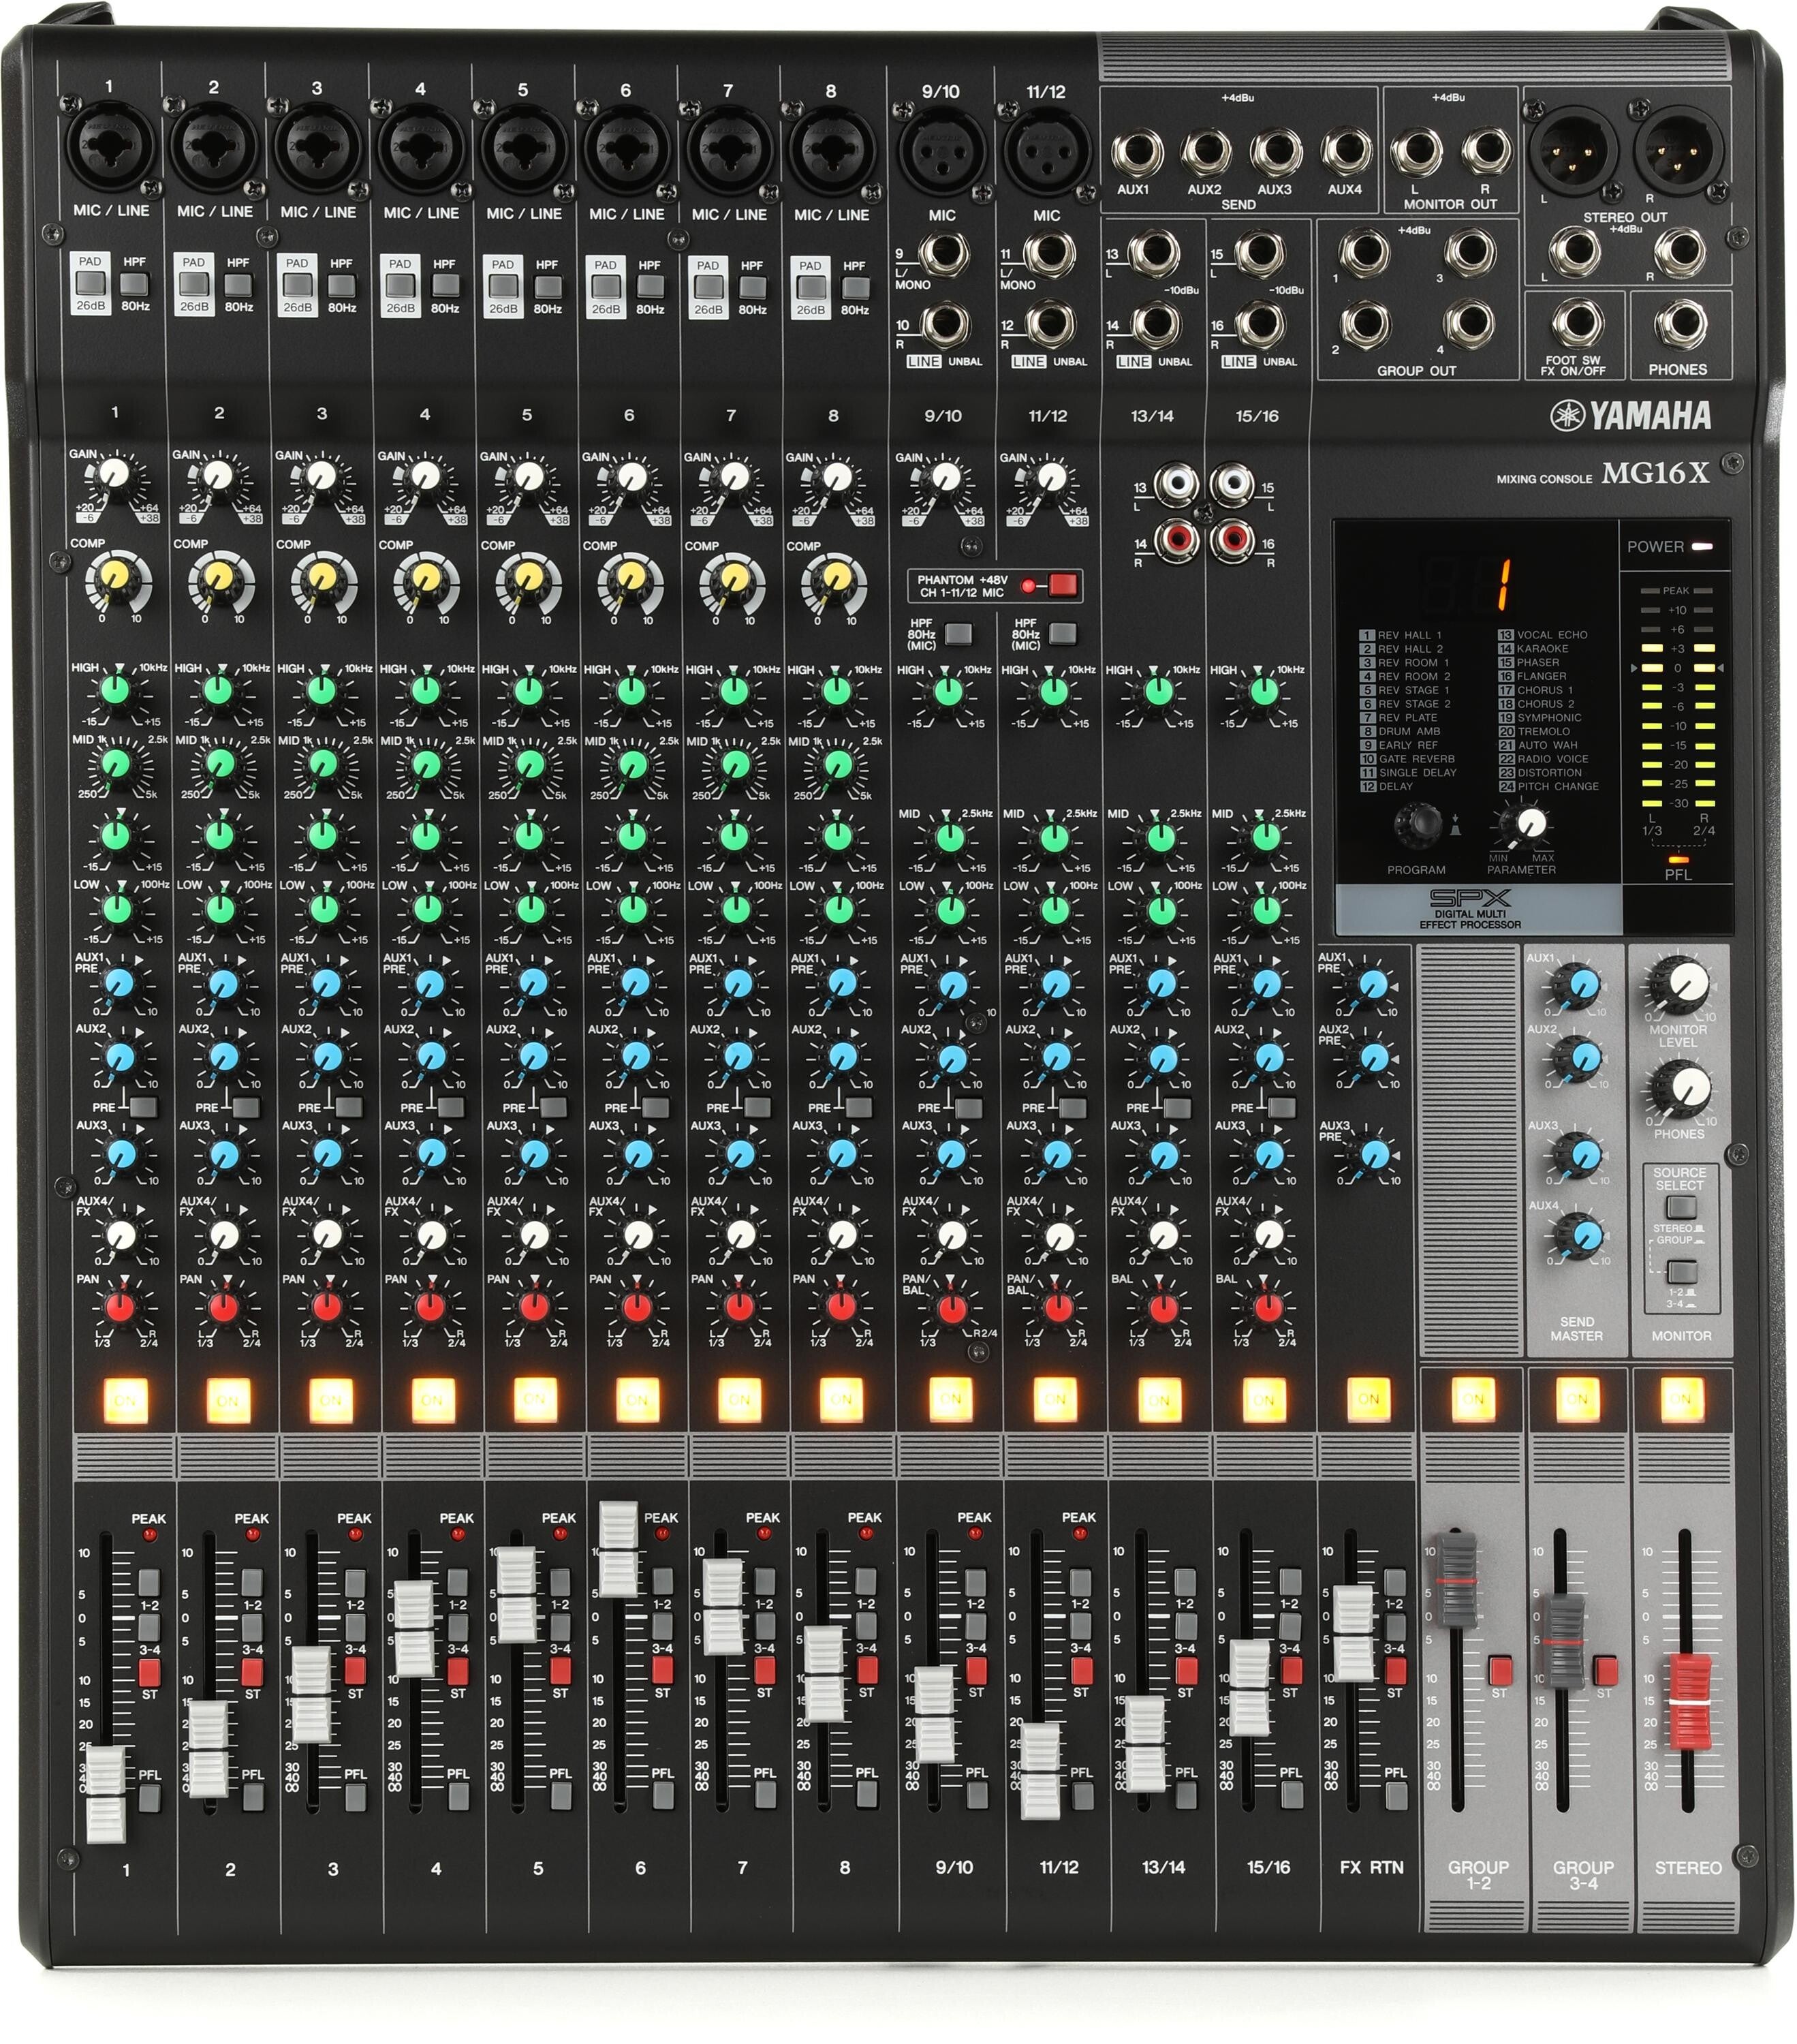 Yamaha MG16X CV 16-channel Stereo Mixer | Sweetwater